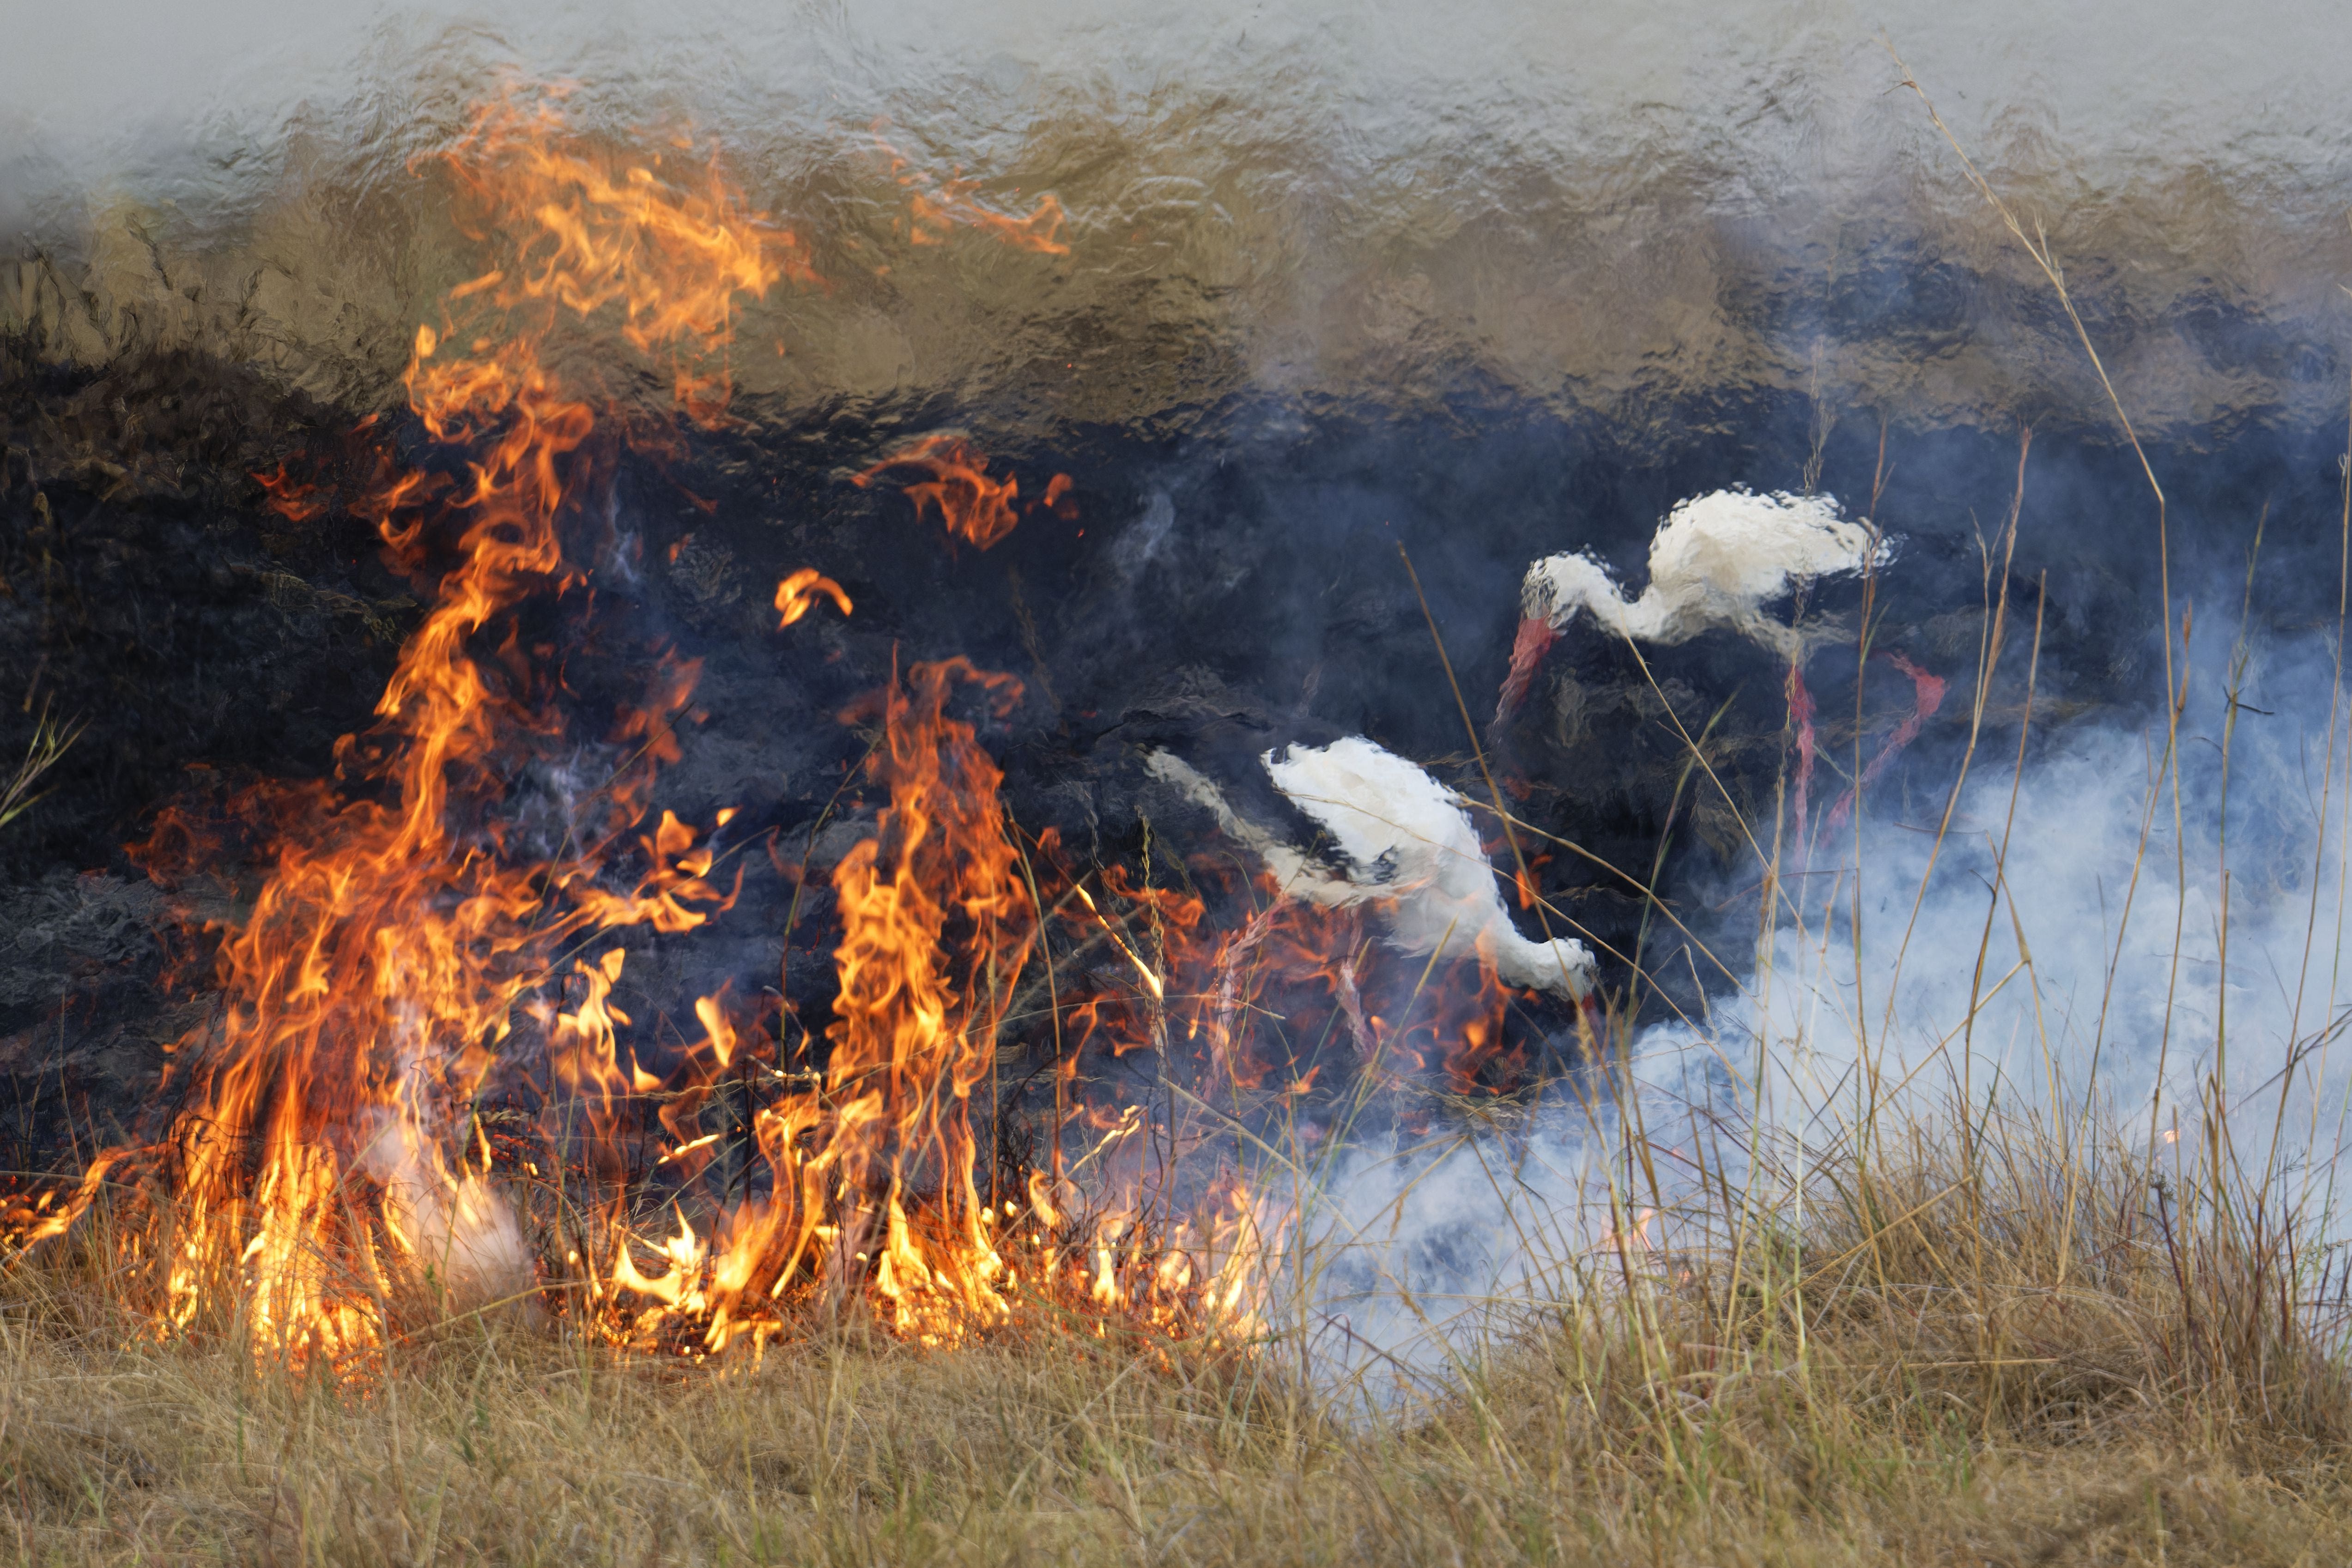 Two white storks hunting alongside a fire in Kenya that had been lit to clear bushland are among the images released as part of the Wildlife Photography of the Year awards (Elza Friedlander/PA)